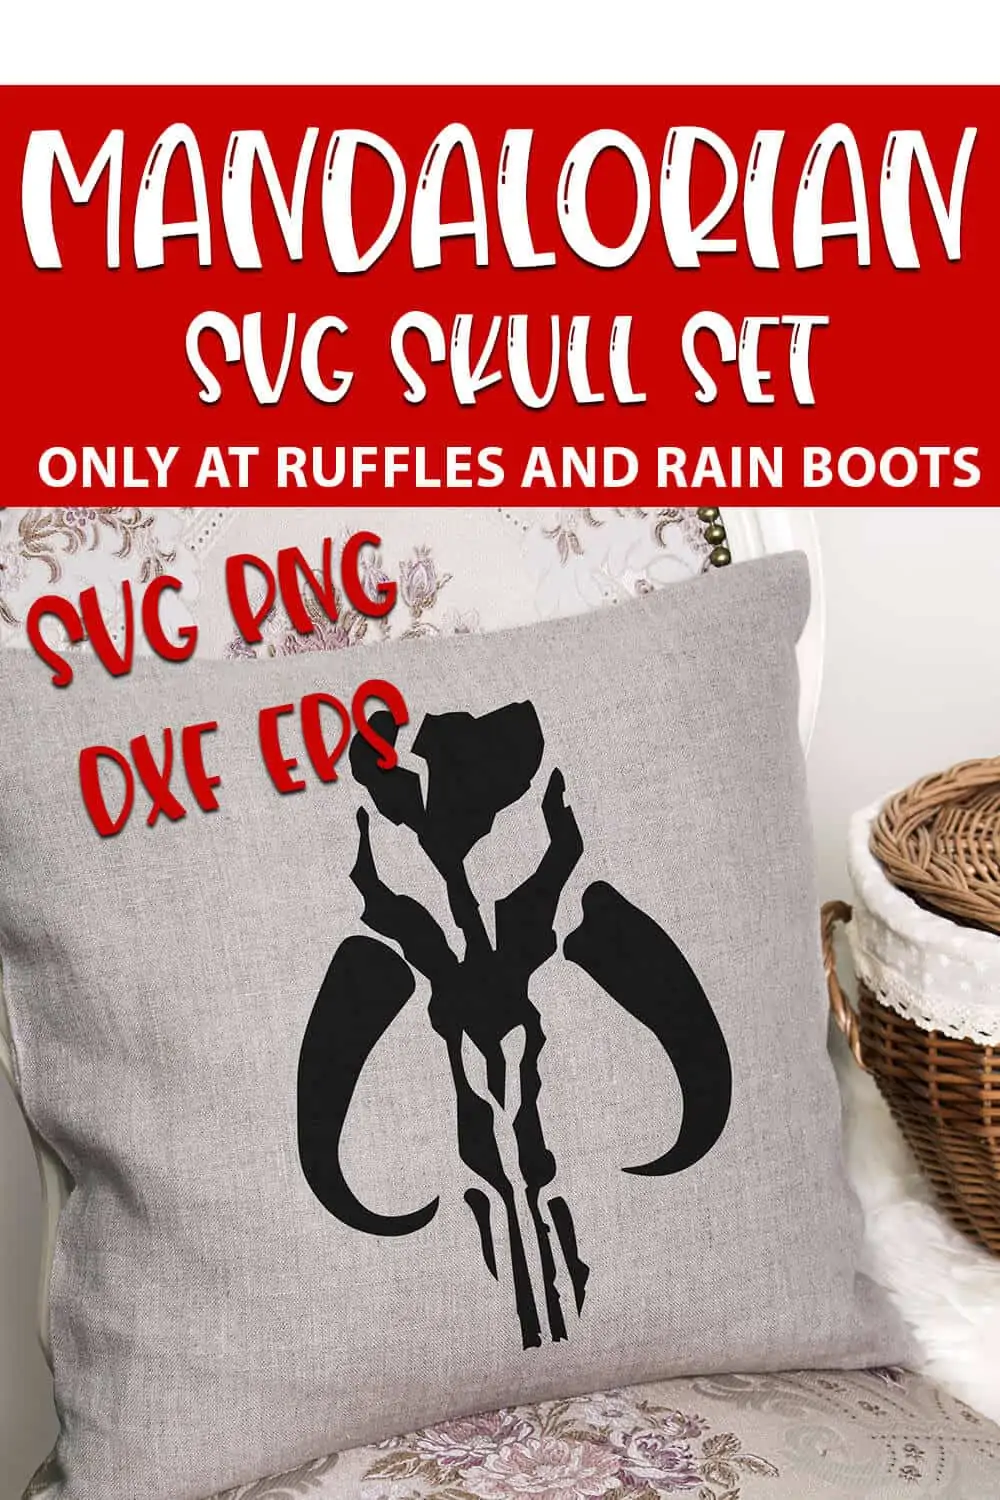 Mandalorian Skull SVG on a pillow with text which reads mandalorian svg skull set